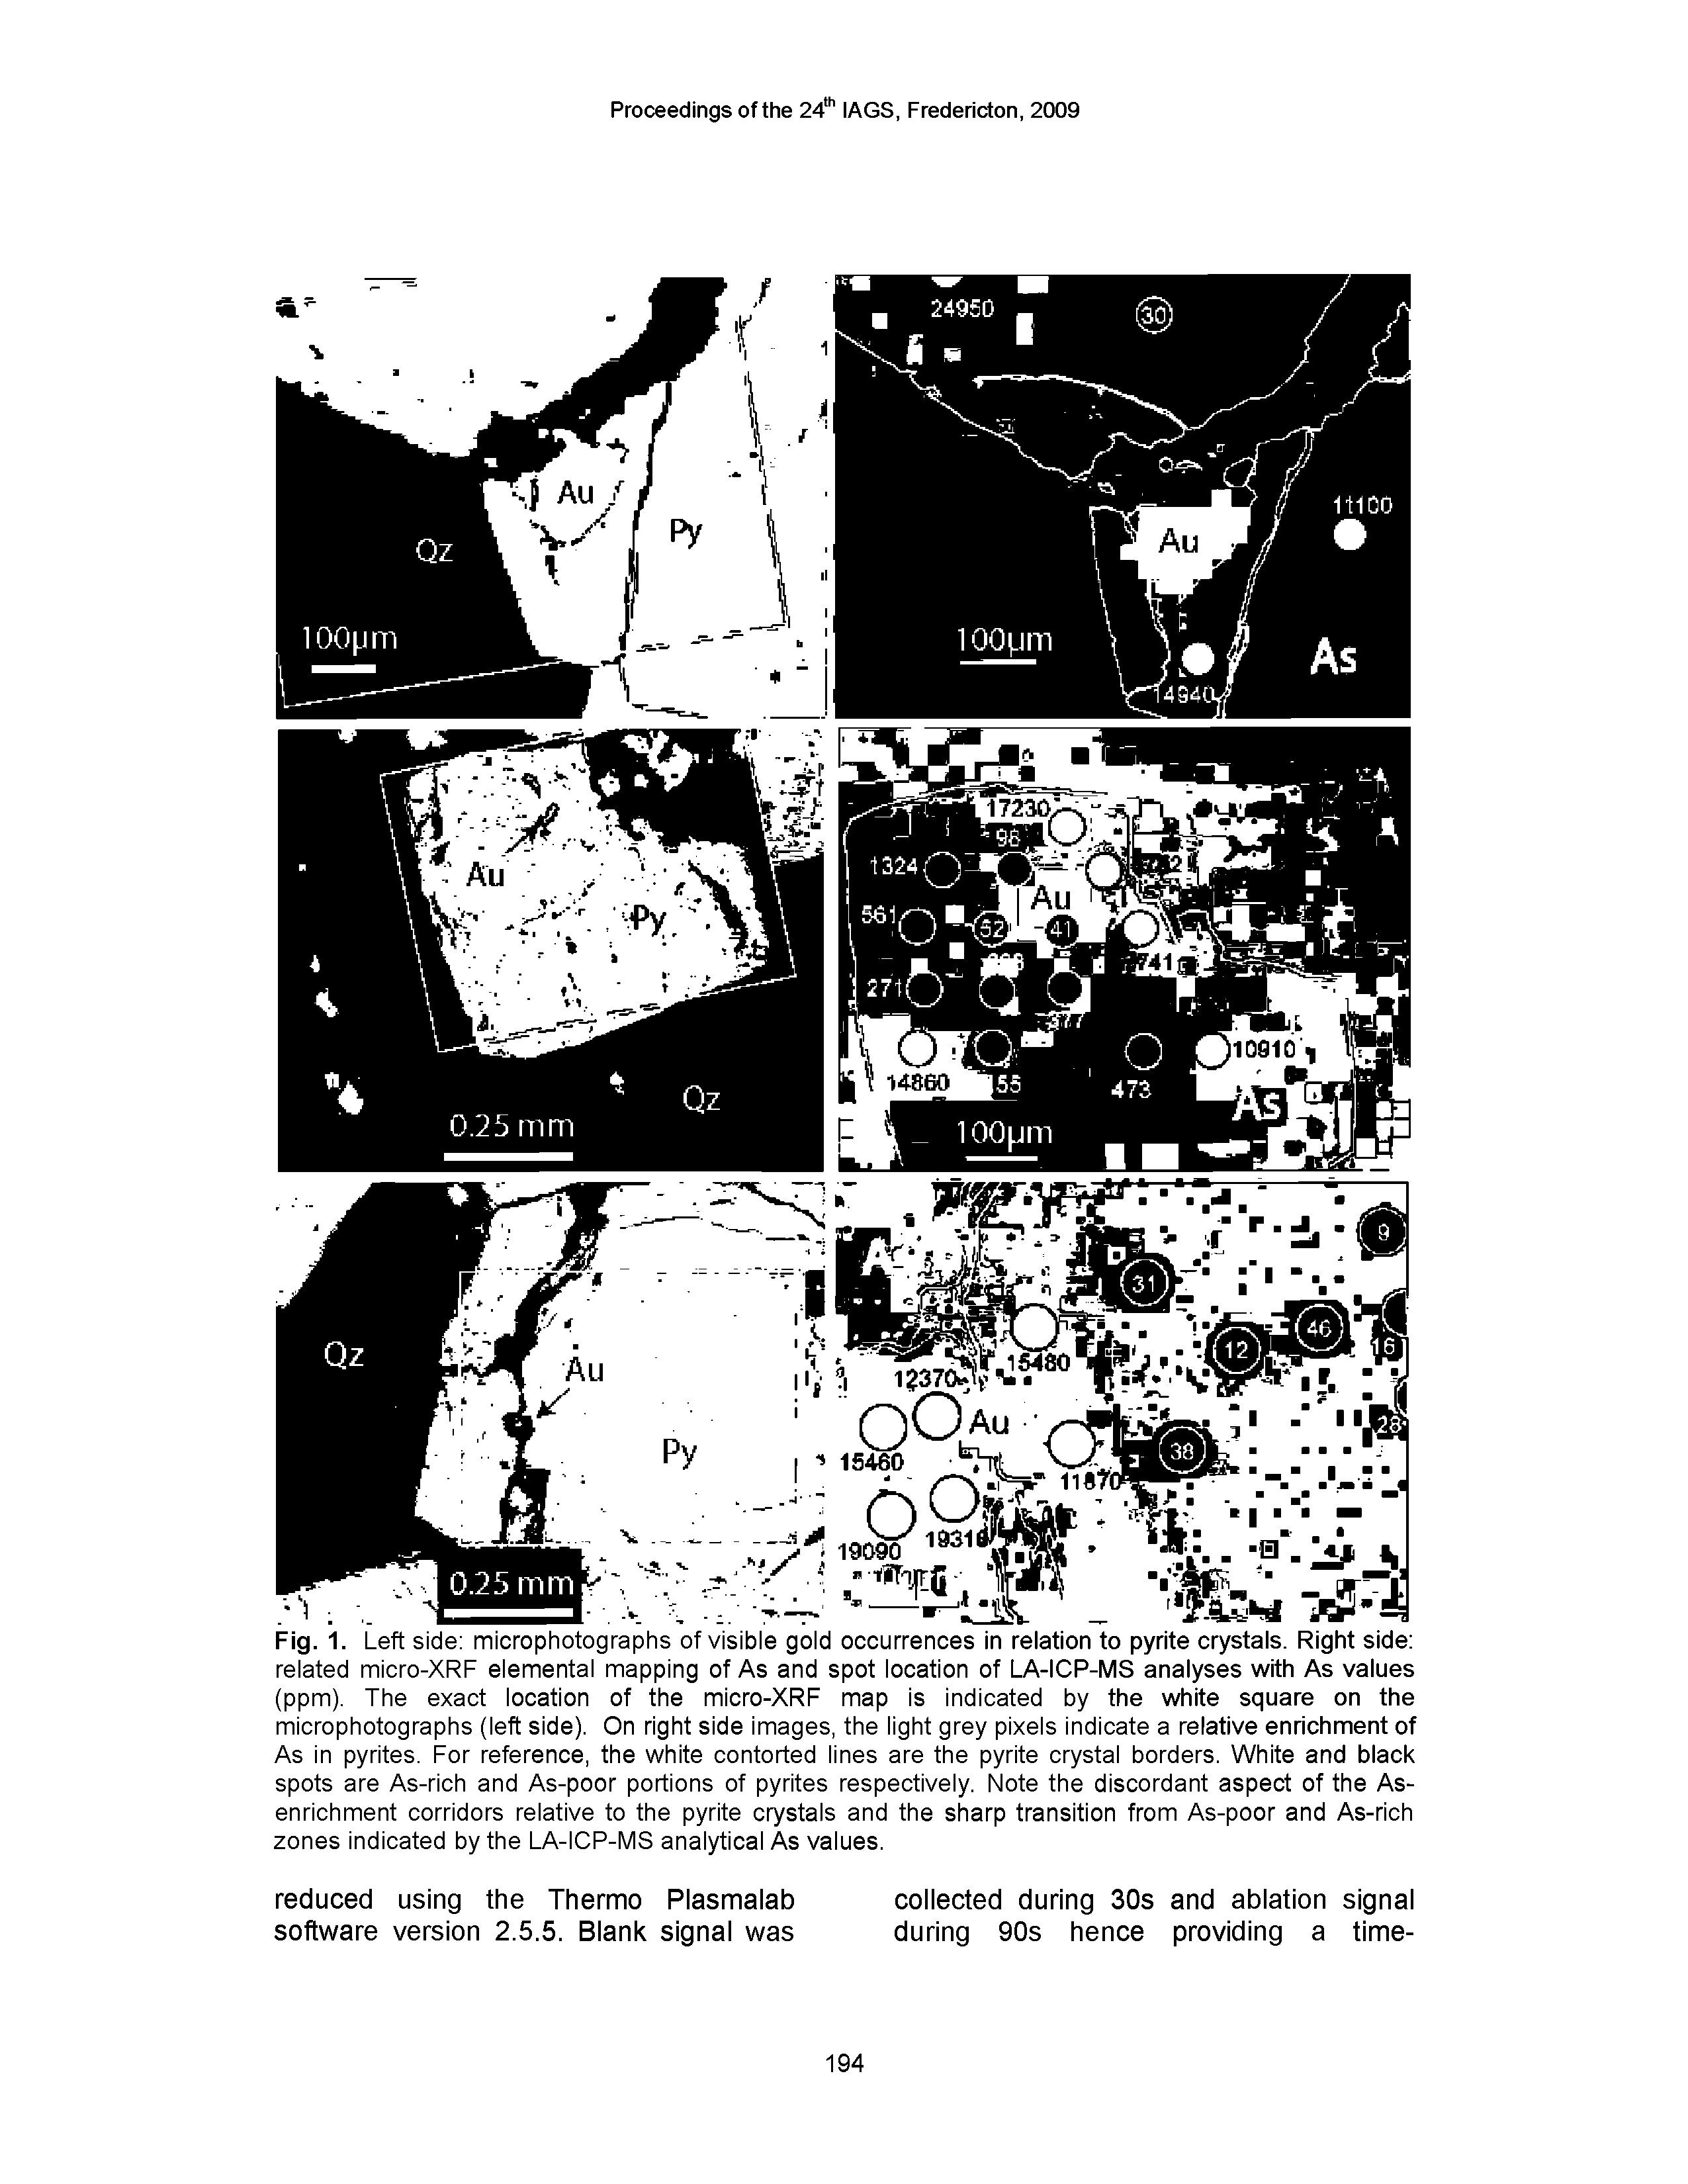 Fig. 1. Left side microphotographs of visible gold occurrences in relation to pyrite crystals. Right side related micro-XRF elemental mapping of As and spot location of LA-ICP-MS analyses with As values (ppm). The exact location of the micro-XRF map is indicated by the white square on the microphotographs (left side). On right side images, the light grey pixels indicate a relative enrichment of As in pyrites. For reference, the white contorted lines are the pyrite crystal borders. White and black spots are As-rich and As-poor portions of pyrites respectively. Note the discordant aspect of the As-enrichment corridors relative to the pyrite crystals and the sharp transition from As-poor and As-rich zones indicated by the LA-ICP-MS analytical As values.